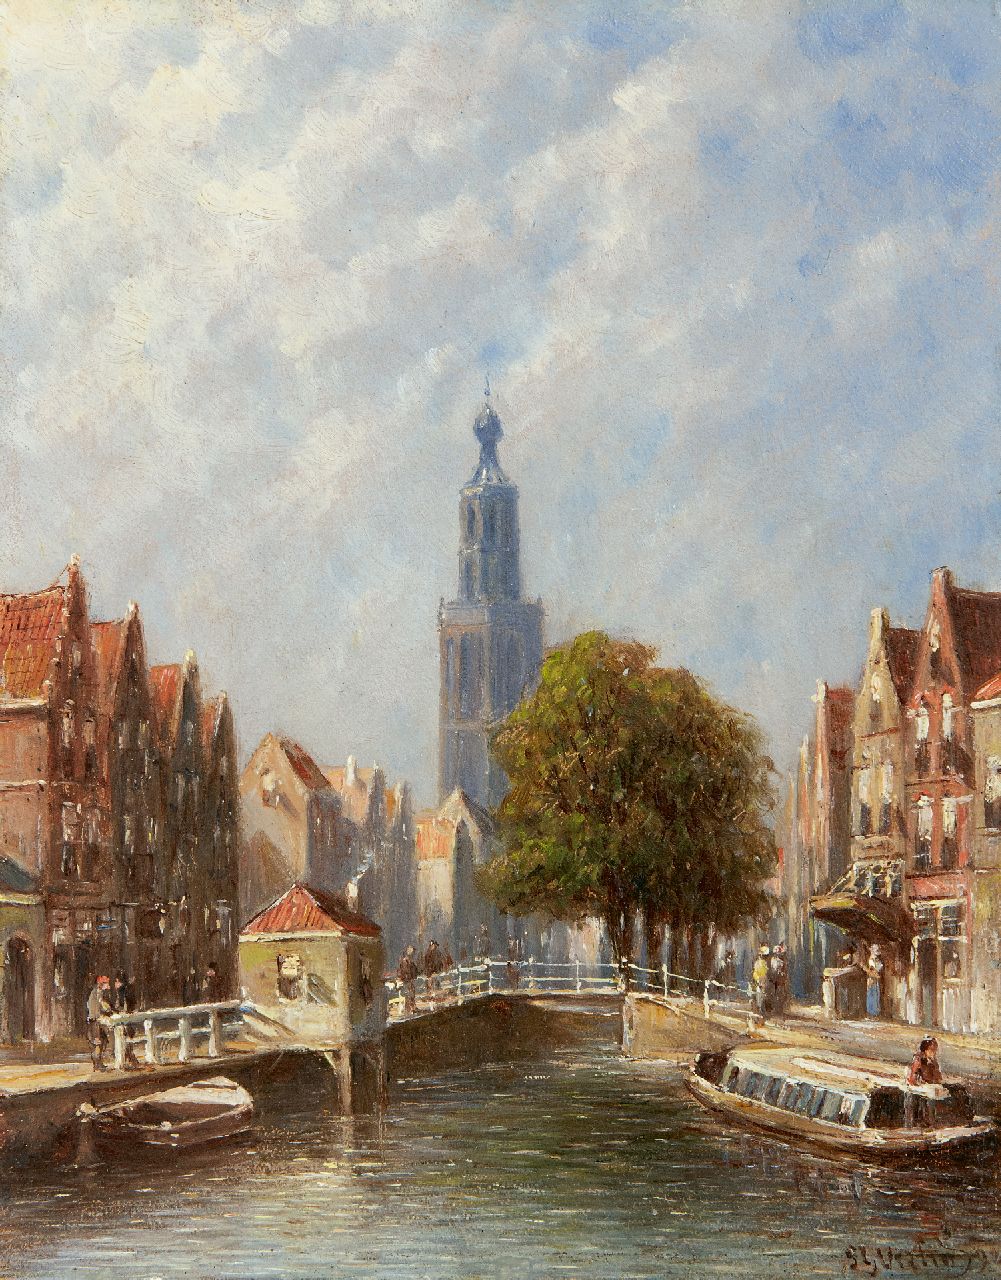 Vertin P.G.  | Petrus Gerardus Vertin | Paintings offered for sale | A town view with the tower of the Sint-Janskerk of Gouda, oil on panel 20.2 x 16.0 cm, signed l.r. and dated '93